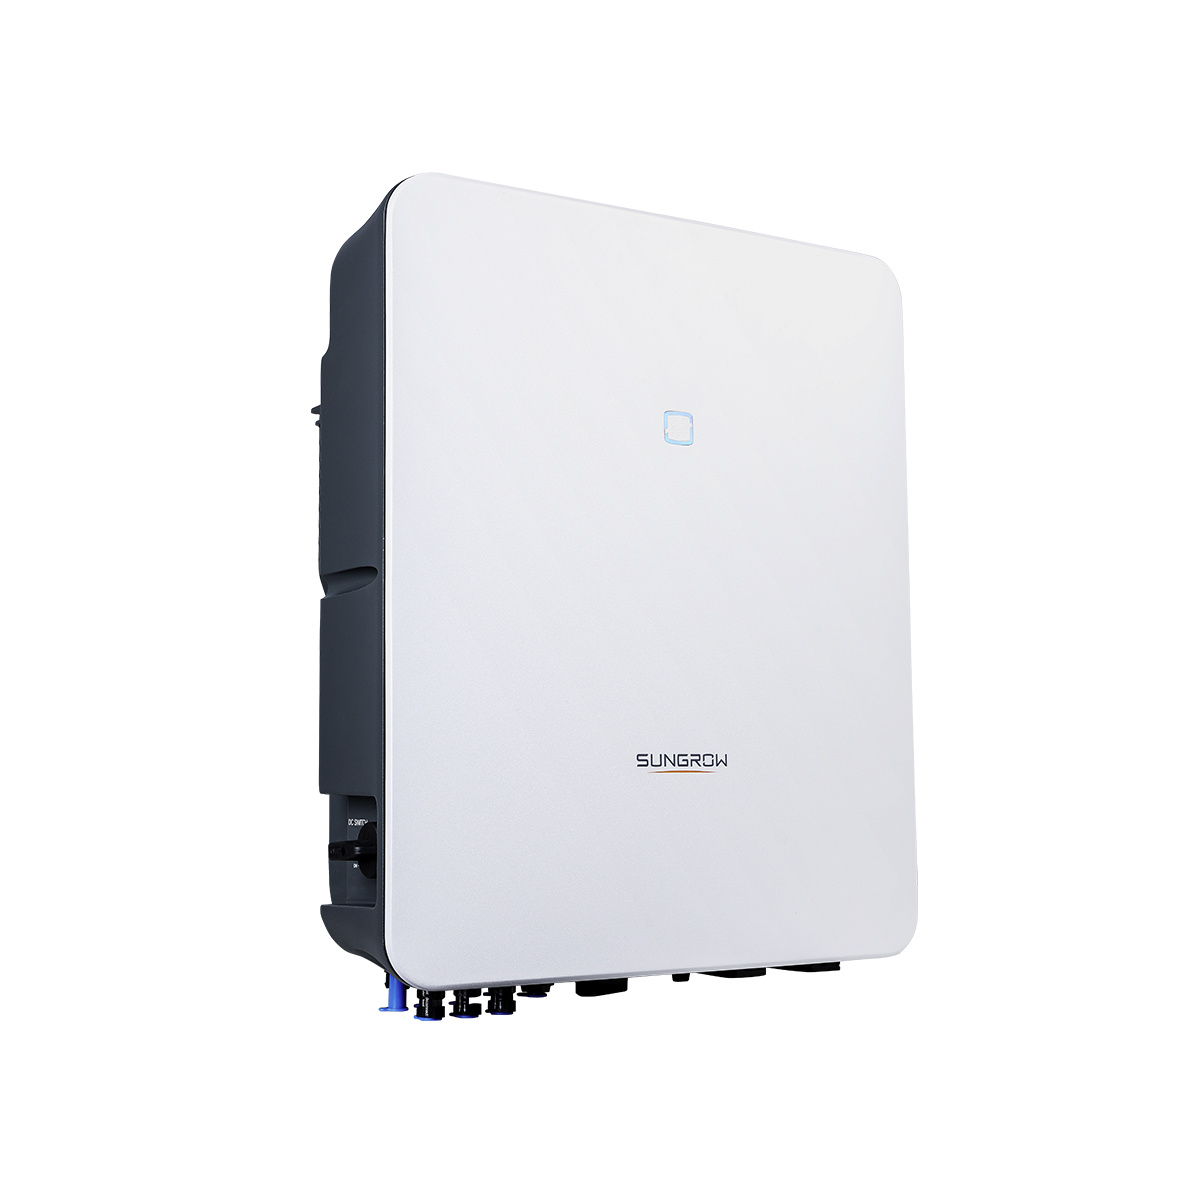 Picture of Sungrow hybrid inverter SH10RT V112 - 10 kW 3-phase for private homes